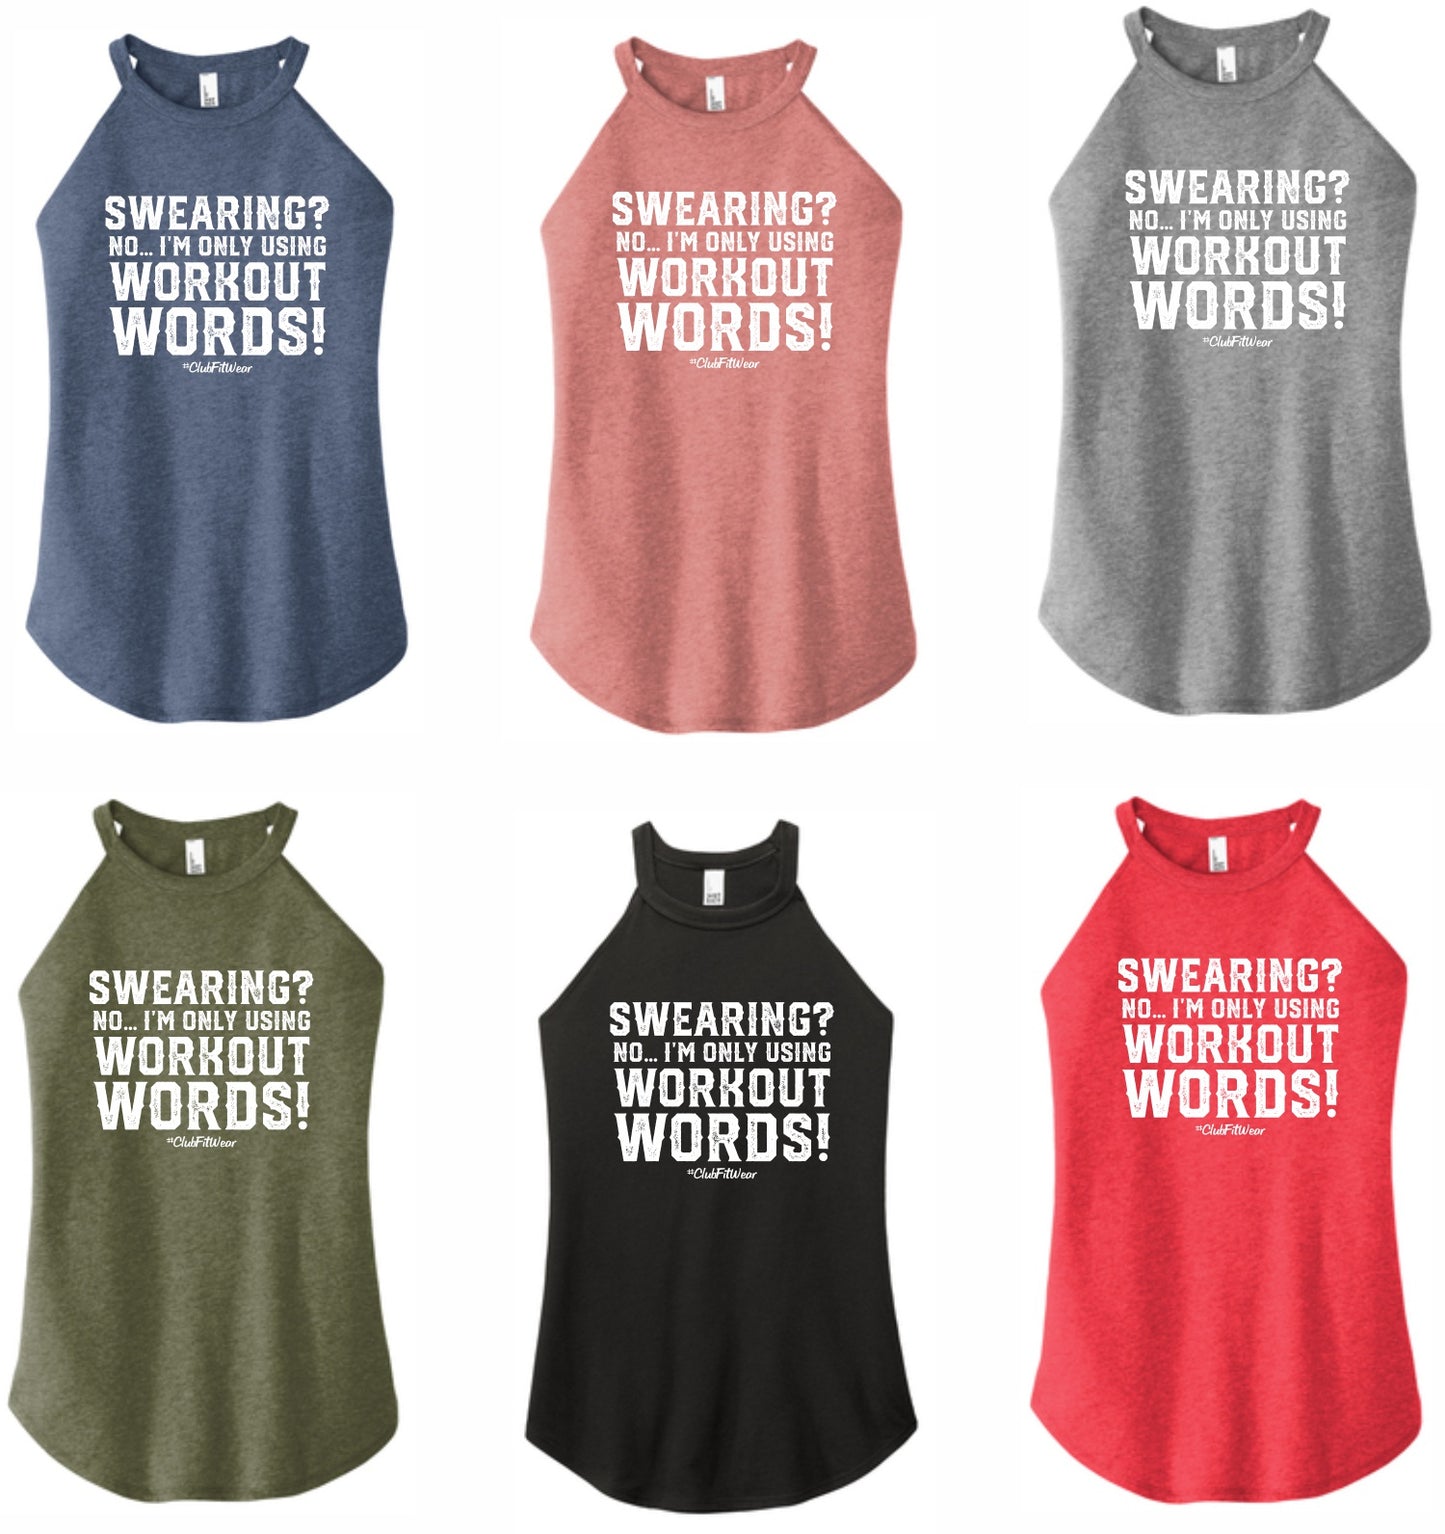 Swearing? No... I'm only using Workout Words - High Neck Rocker Tank